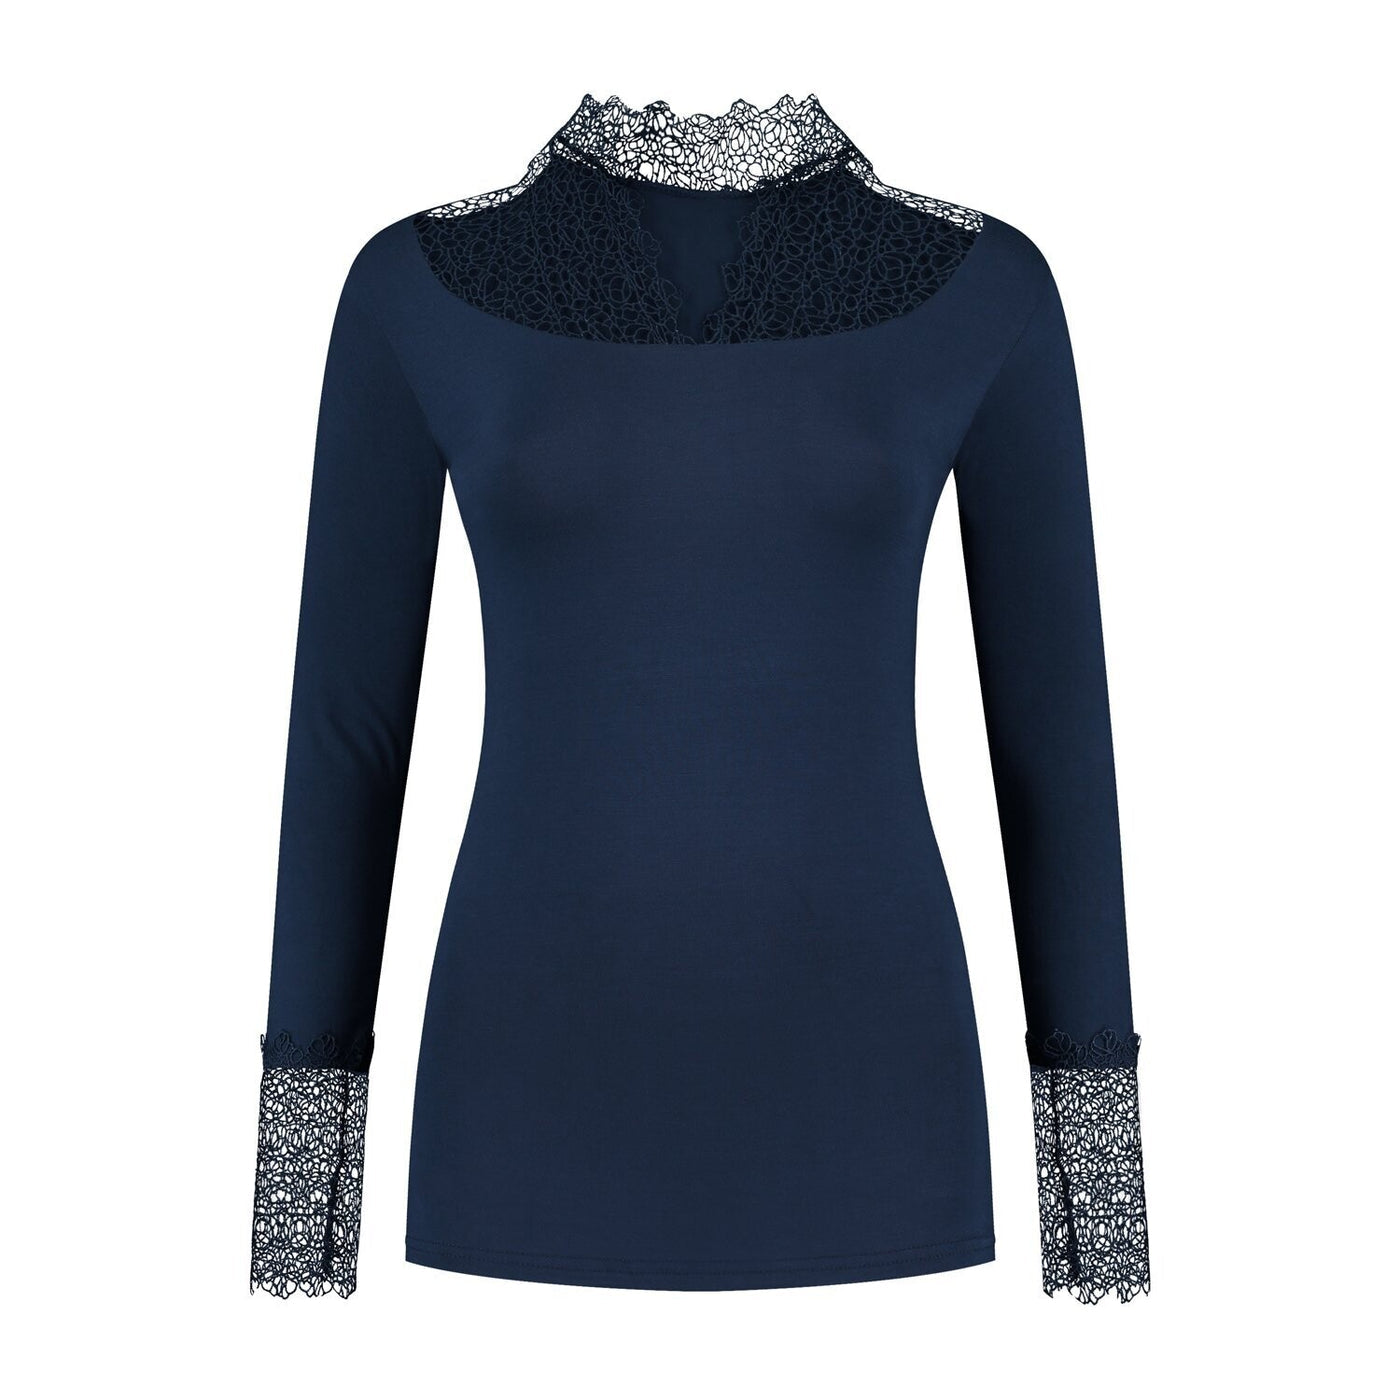 HAYA - Long sleeve undertop with lace details